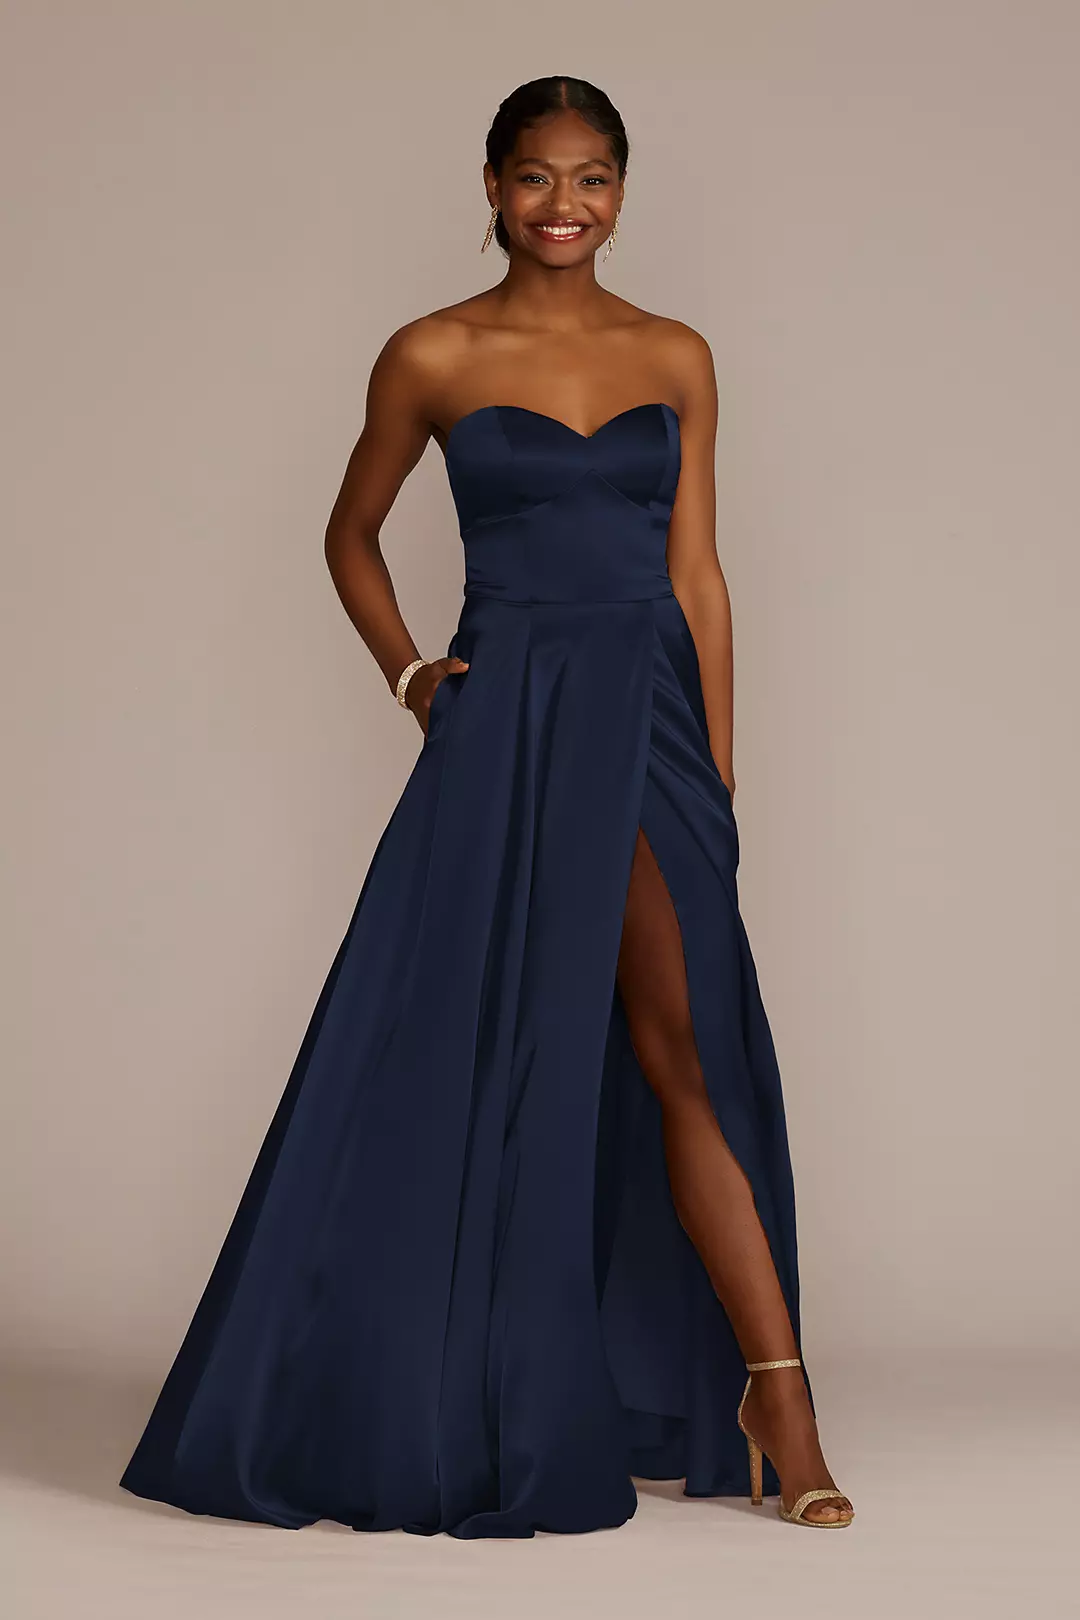 Charmeuse Strapless A-Line Dress Image